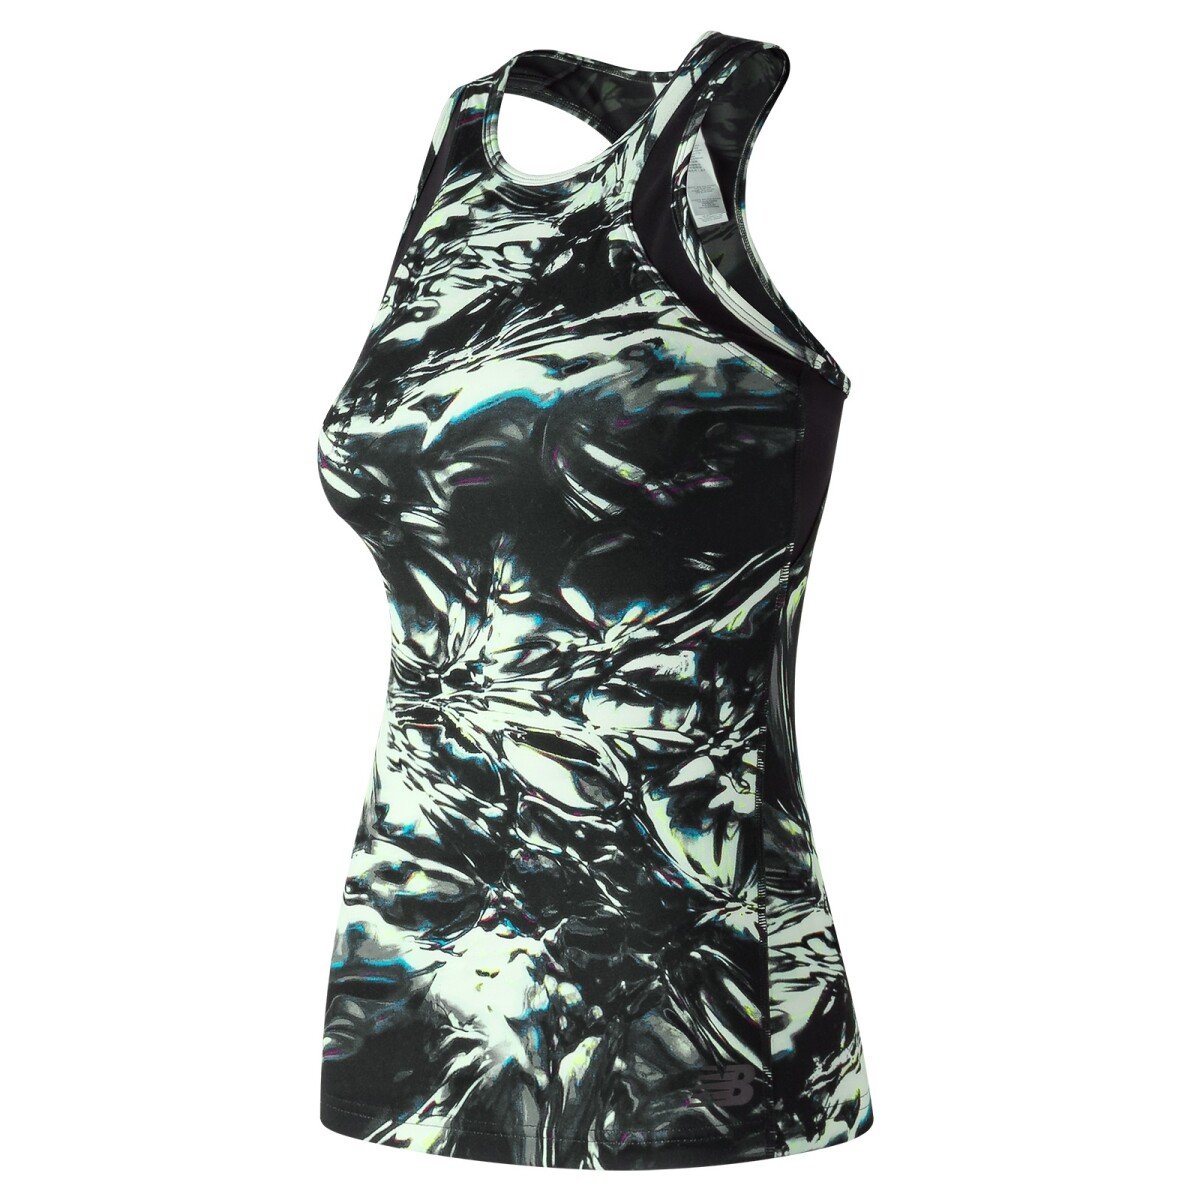 Musculosa New Balance Dama WT73141BTW - BLACK THERMAL WRAPPING 